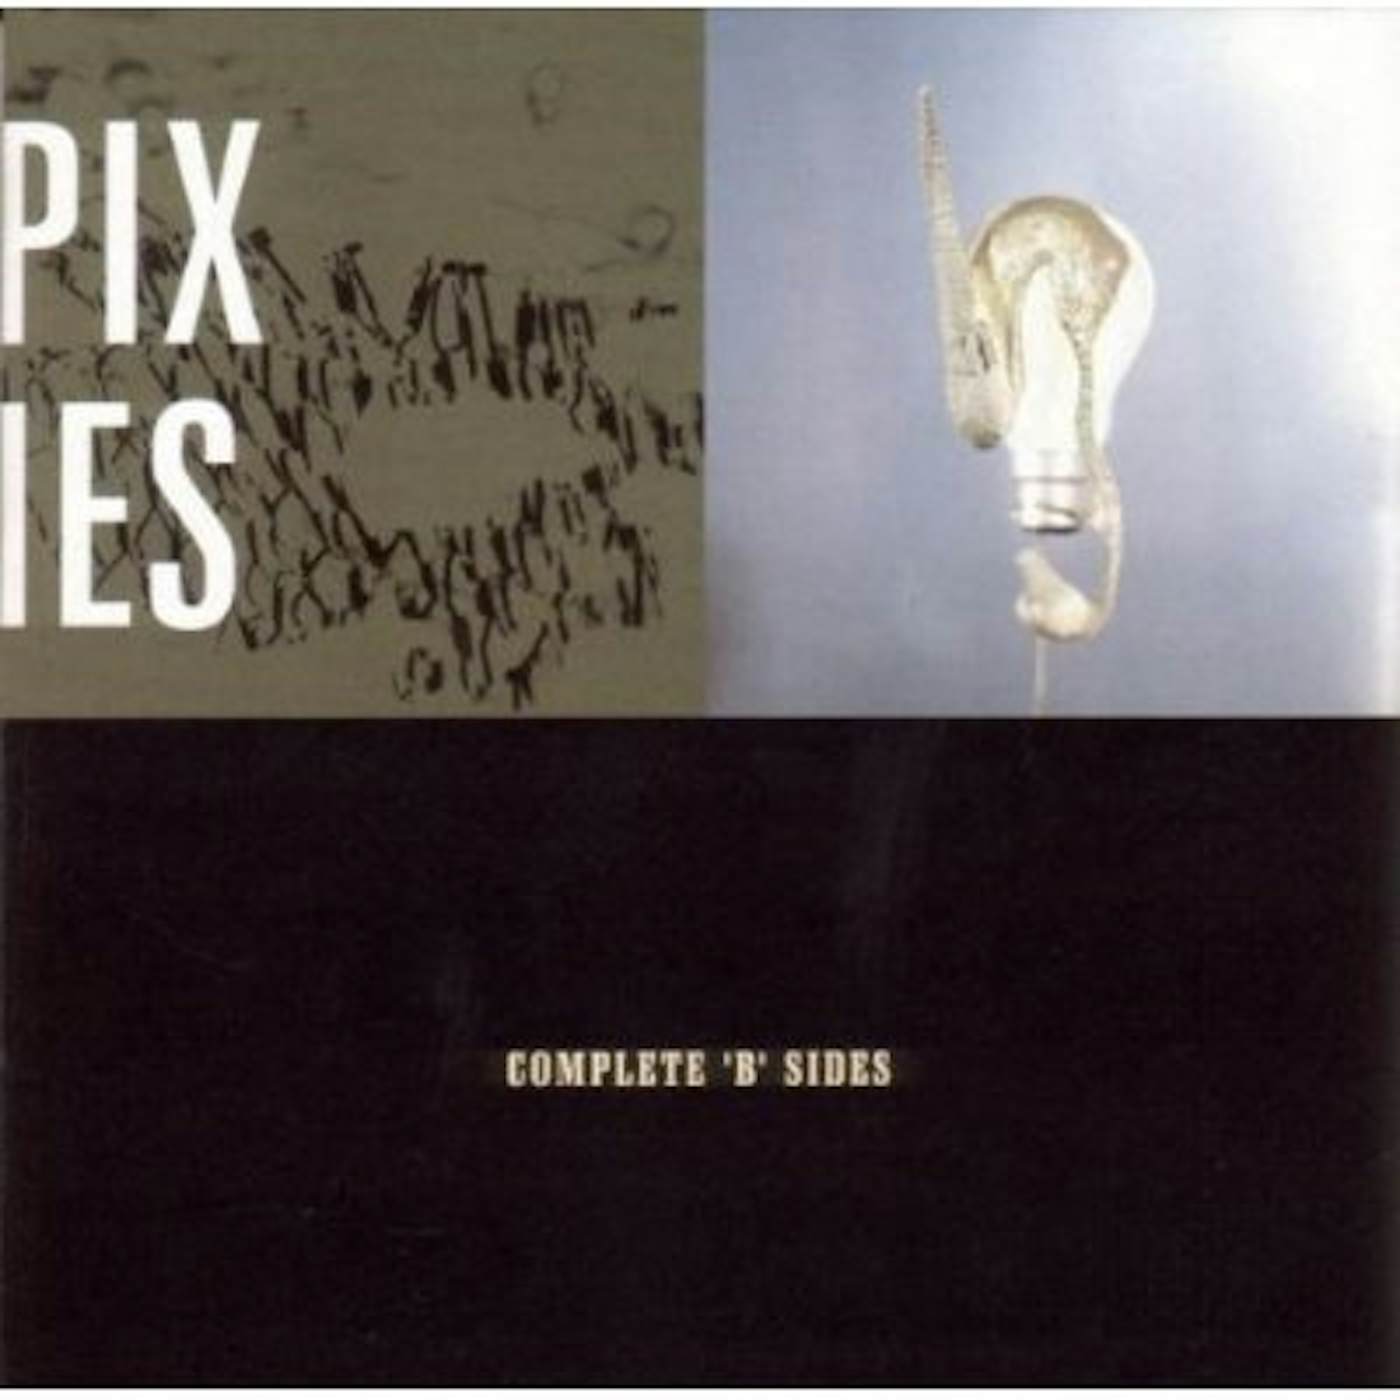 Pixies COMPLETE B-SIDES CD